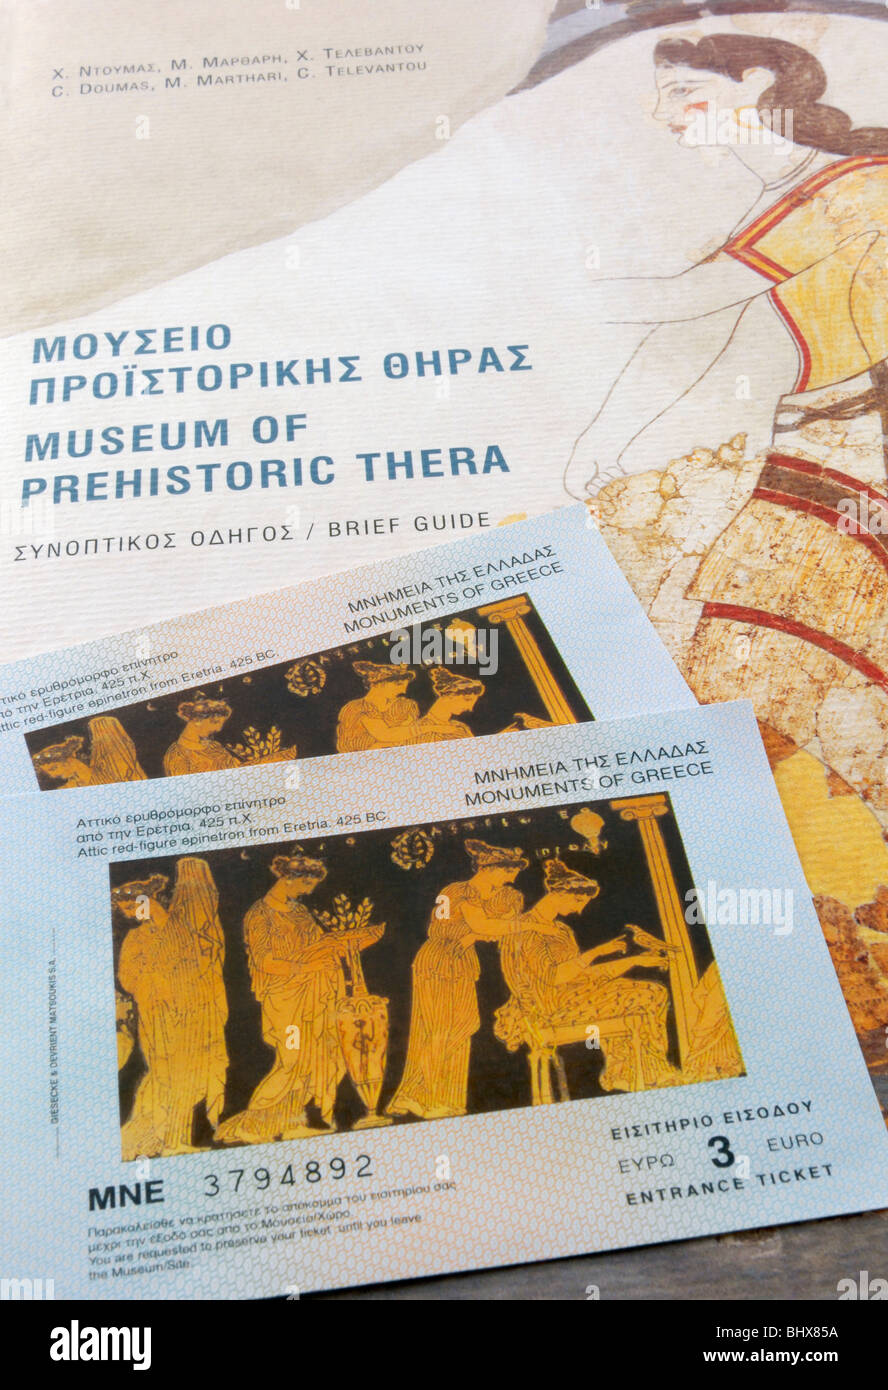 Two tickets to the Museum of Prehistoric Thera and the brief guide book of the Museum. The Museum exhibits the finds that were.. Stock Photo